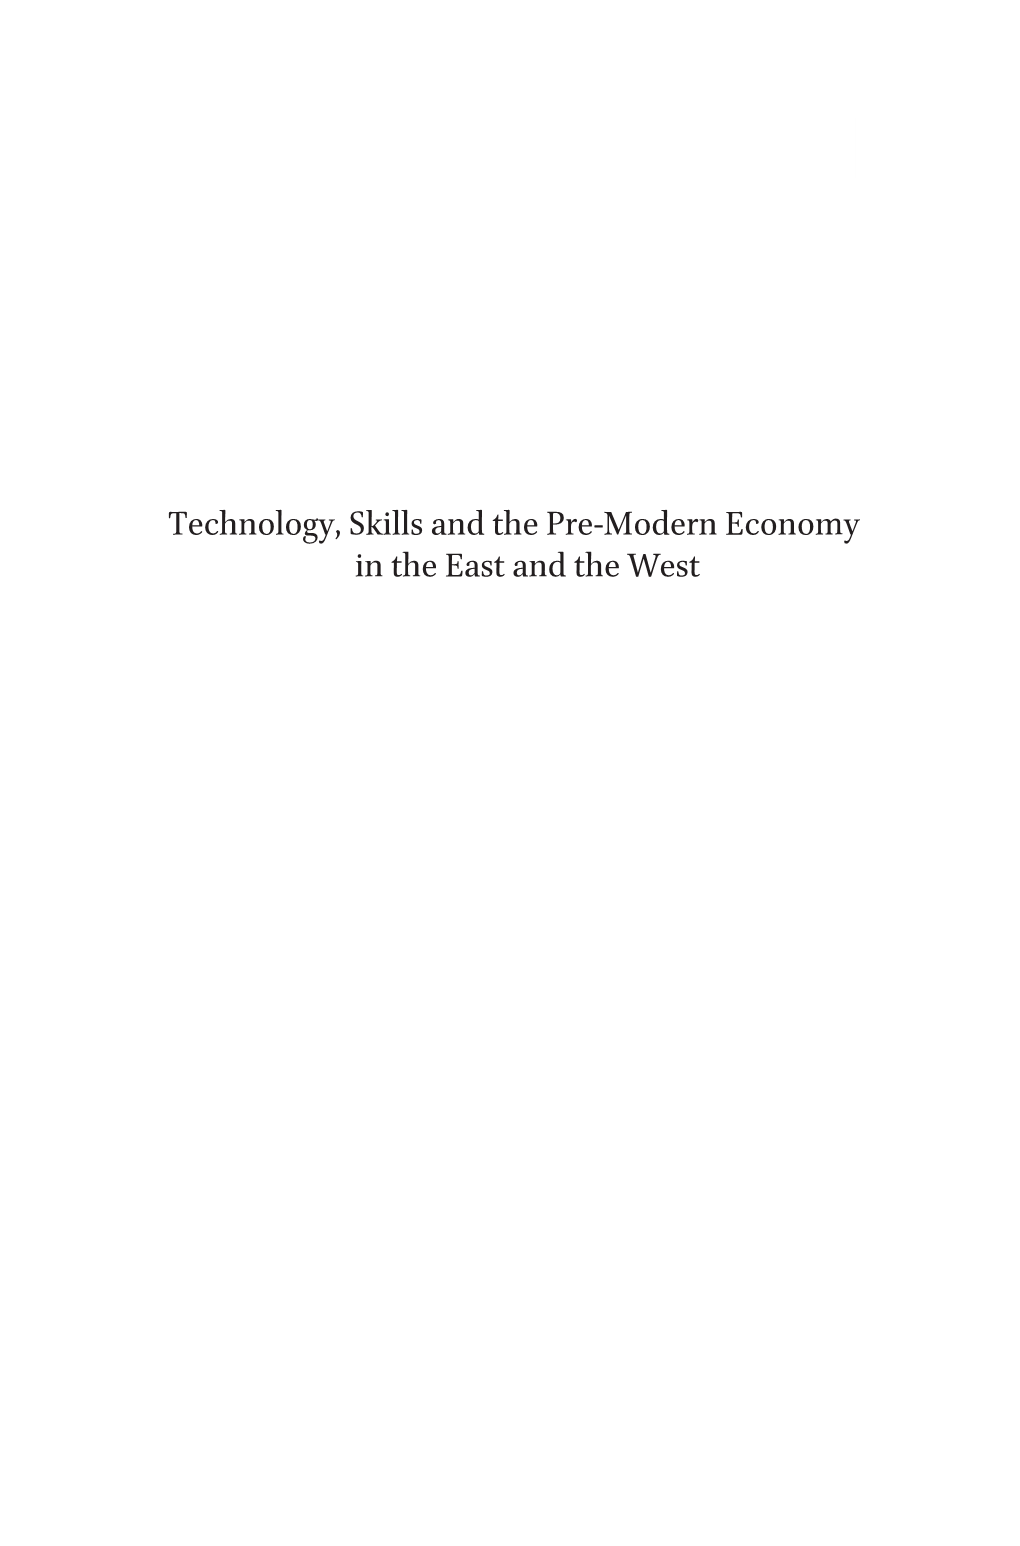 Technology, Skills and the Pre-Modern Economy in the East and the West Ii Contents Global Economics History Series